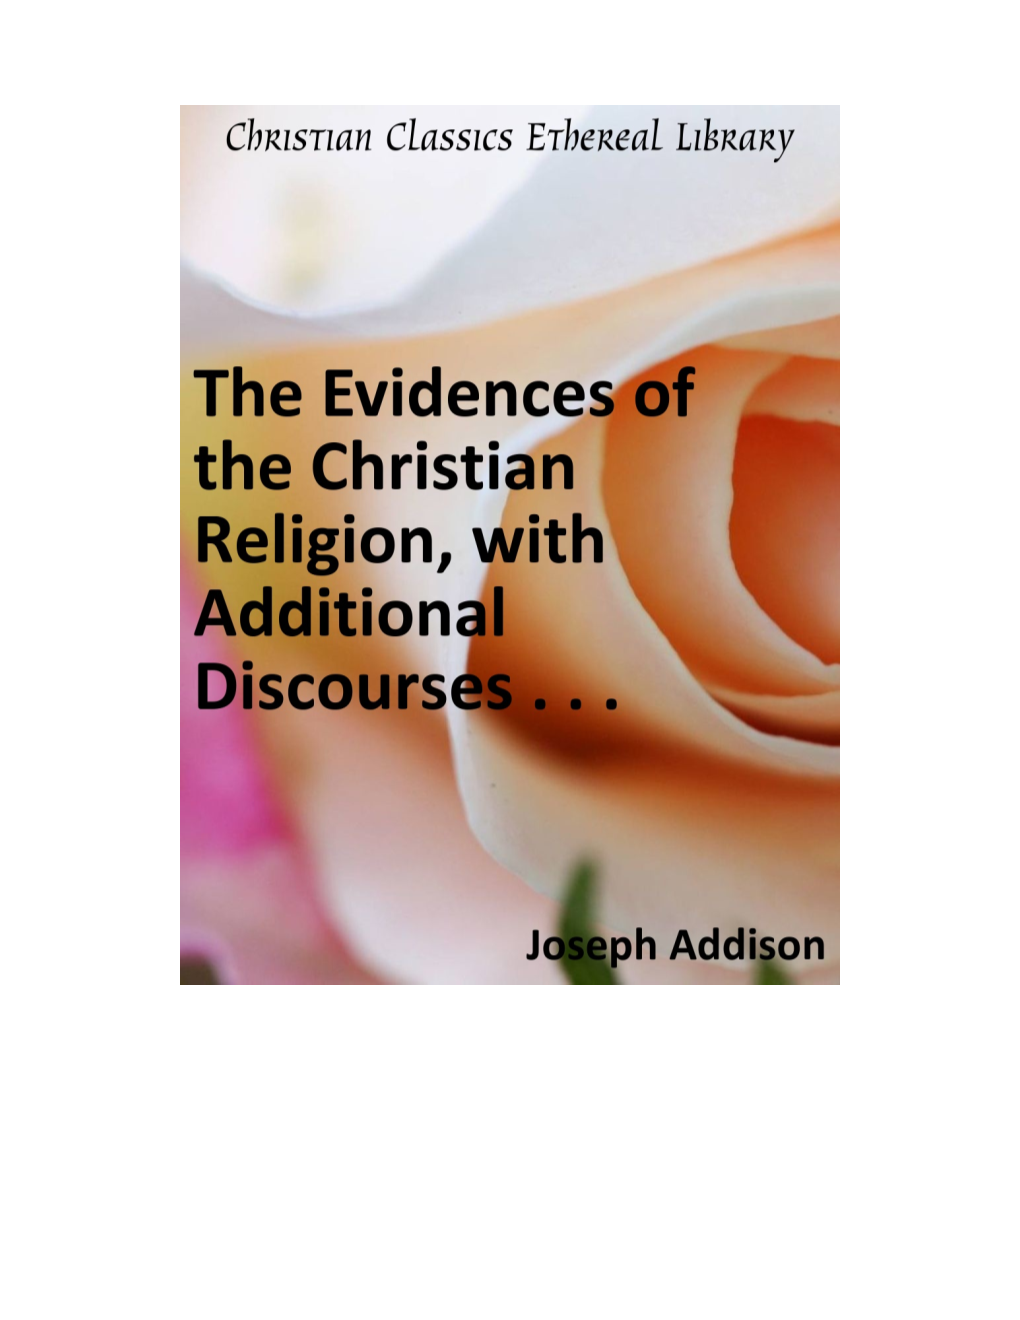 The Evidences of the Christian Religion, with Additional